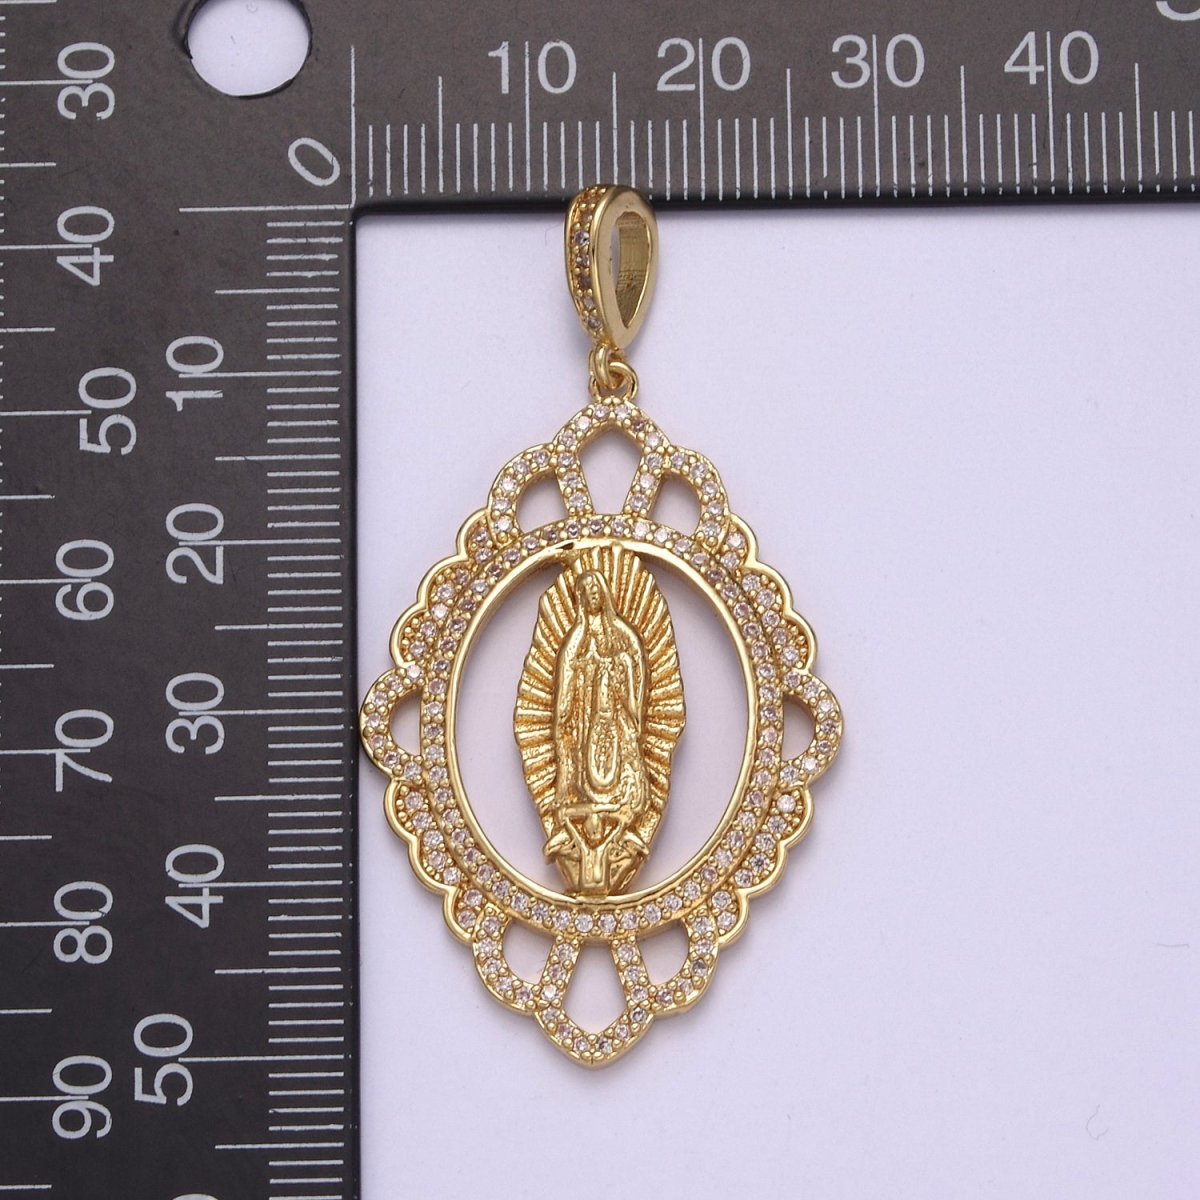 14k Gold Filled Lady Guadalupe Pendant Medallion Cubic Zirconia Charm for Statement Catholic Religious Jewelry Making N-572 - DLUXCA